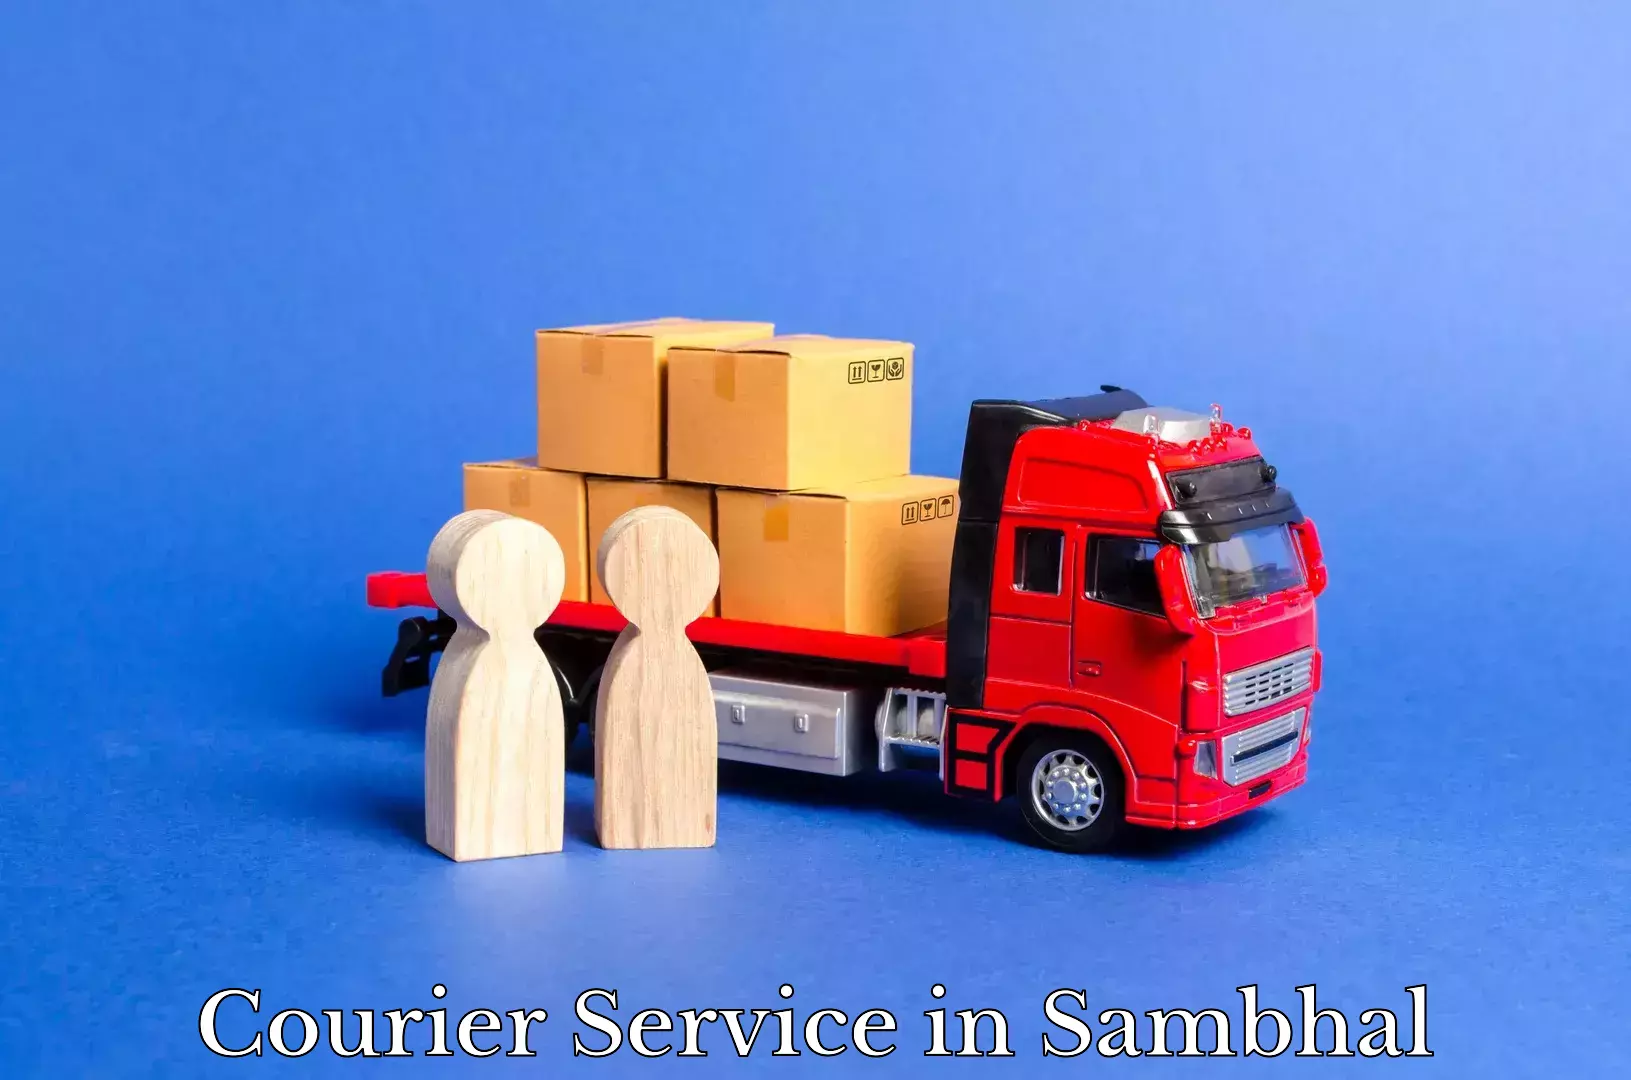 Courier services in Sambhal